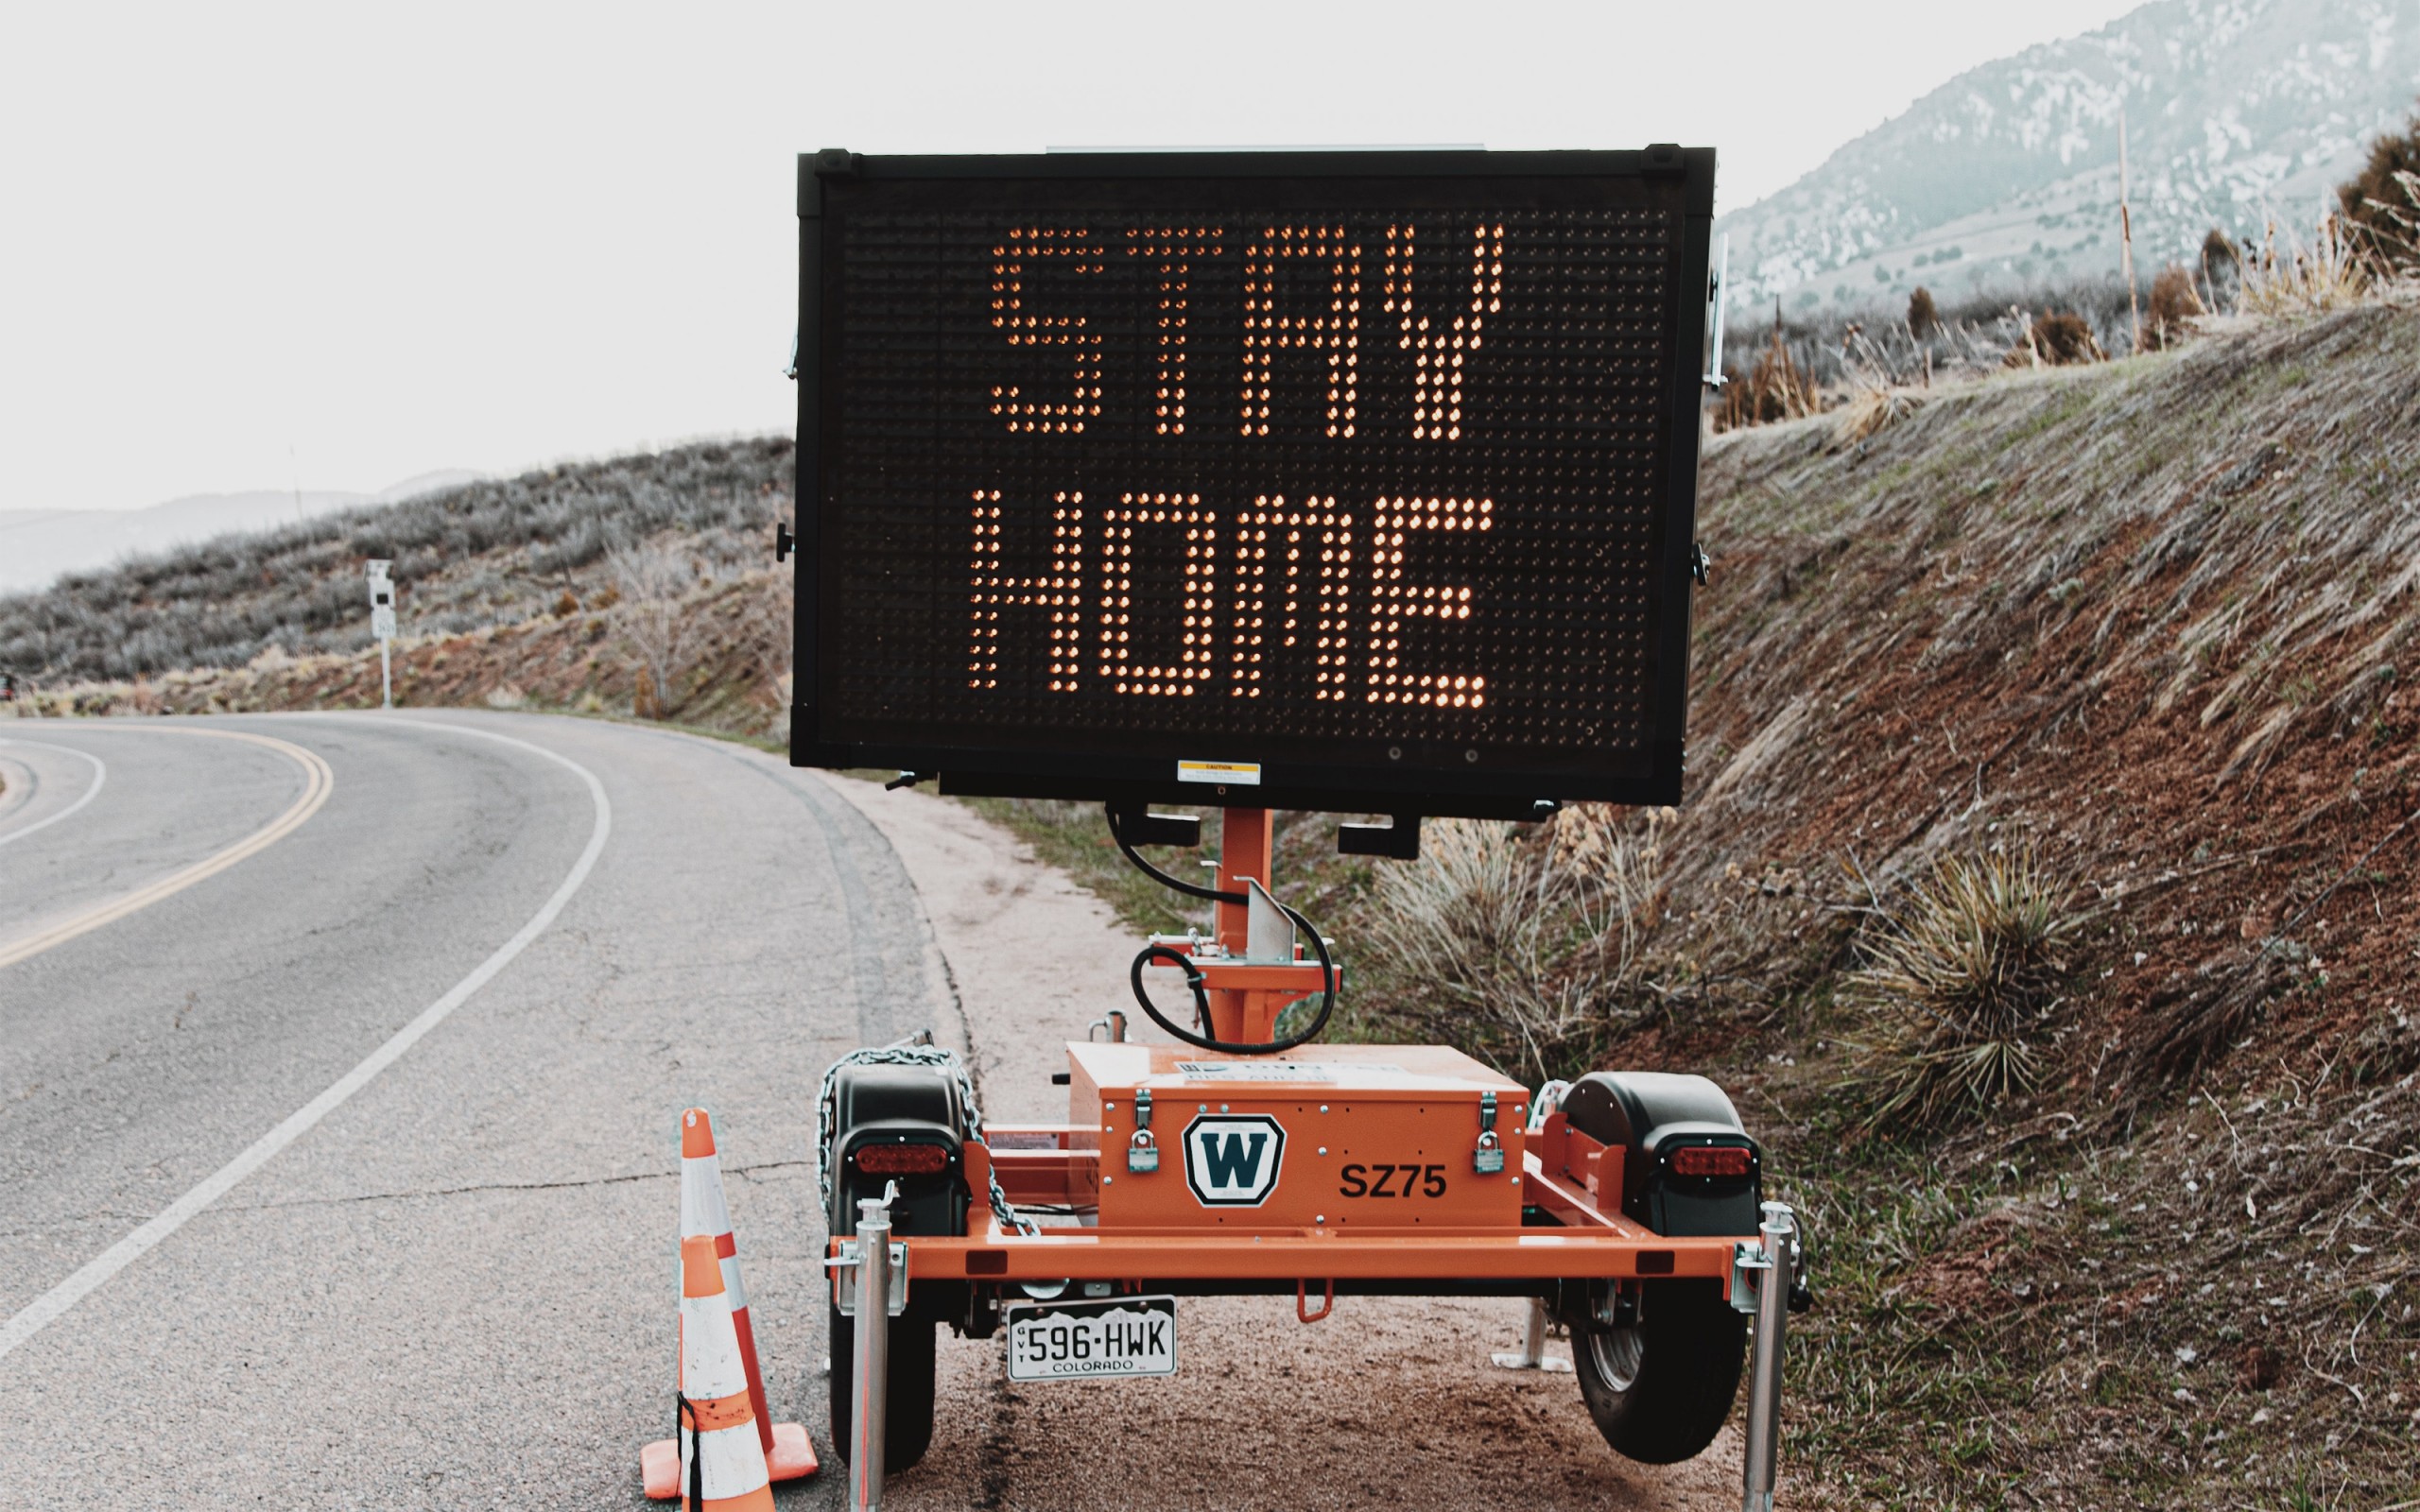 Roadside electronic traffic sign displaying the message "Stay Home"